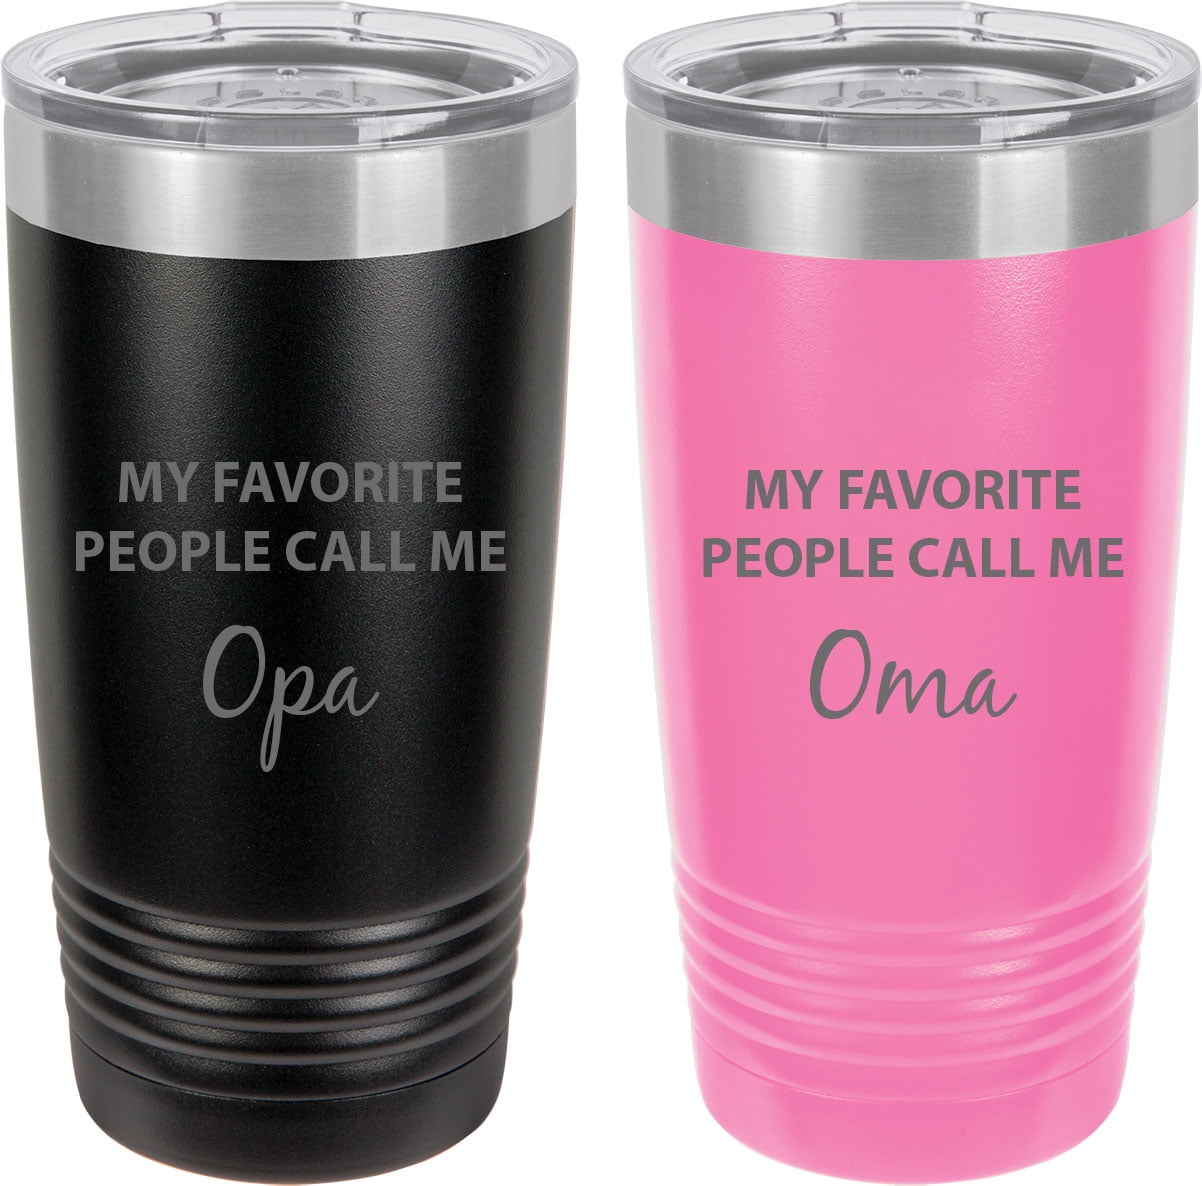 Customized Personalized 20 oz Insulated Tumbler for Grandmother Grandfather Dad 